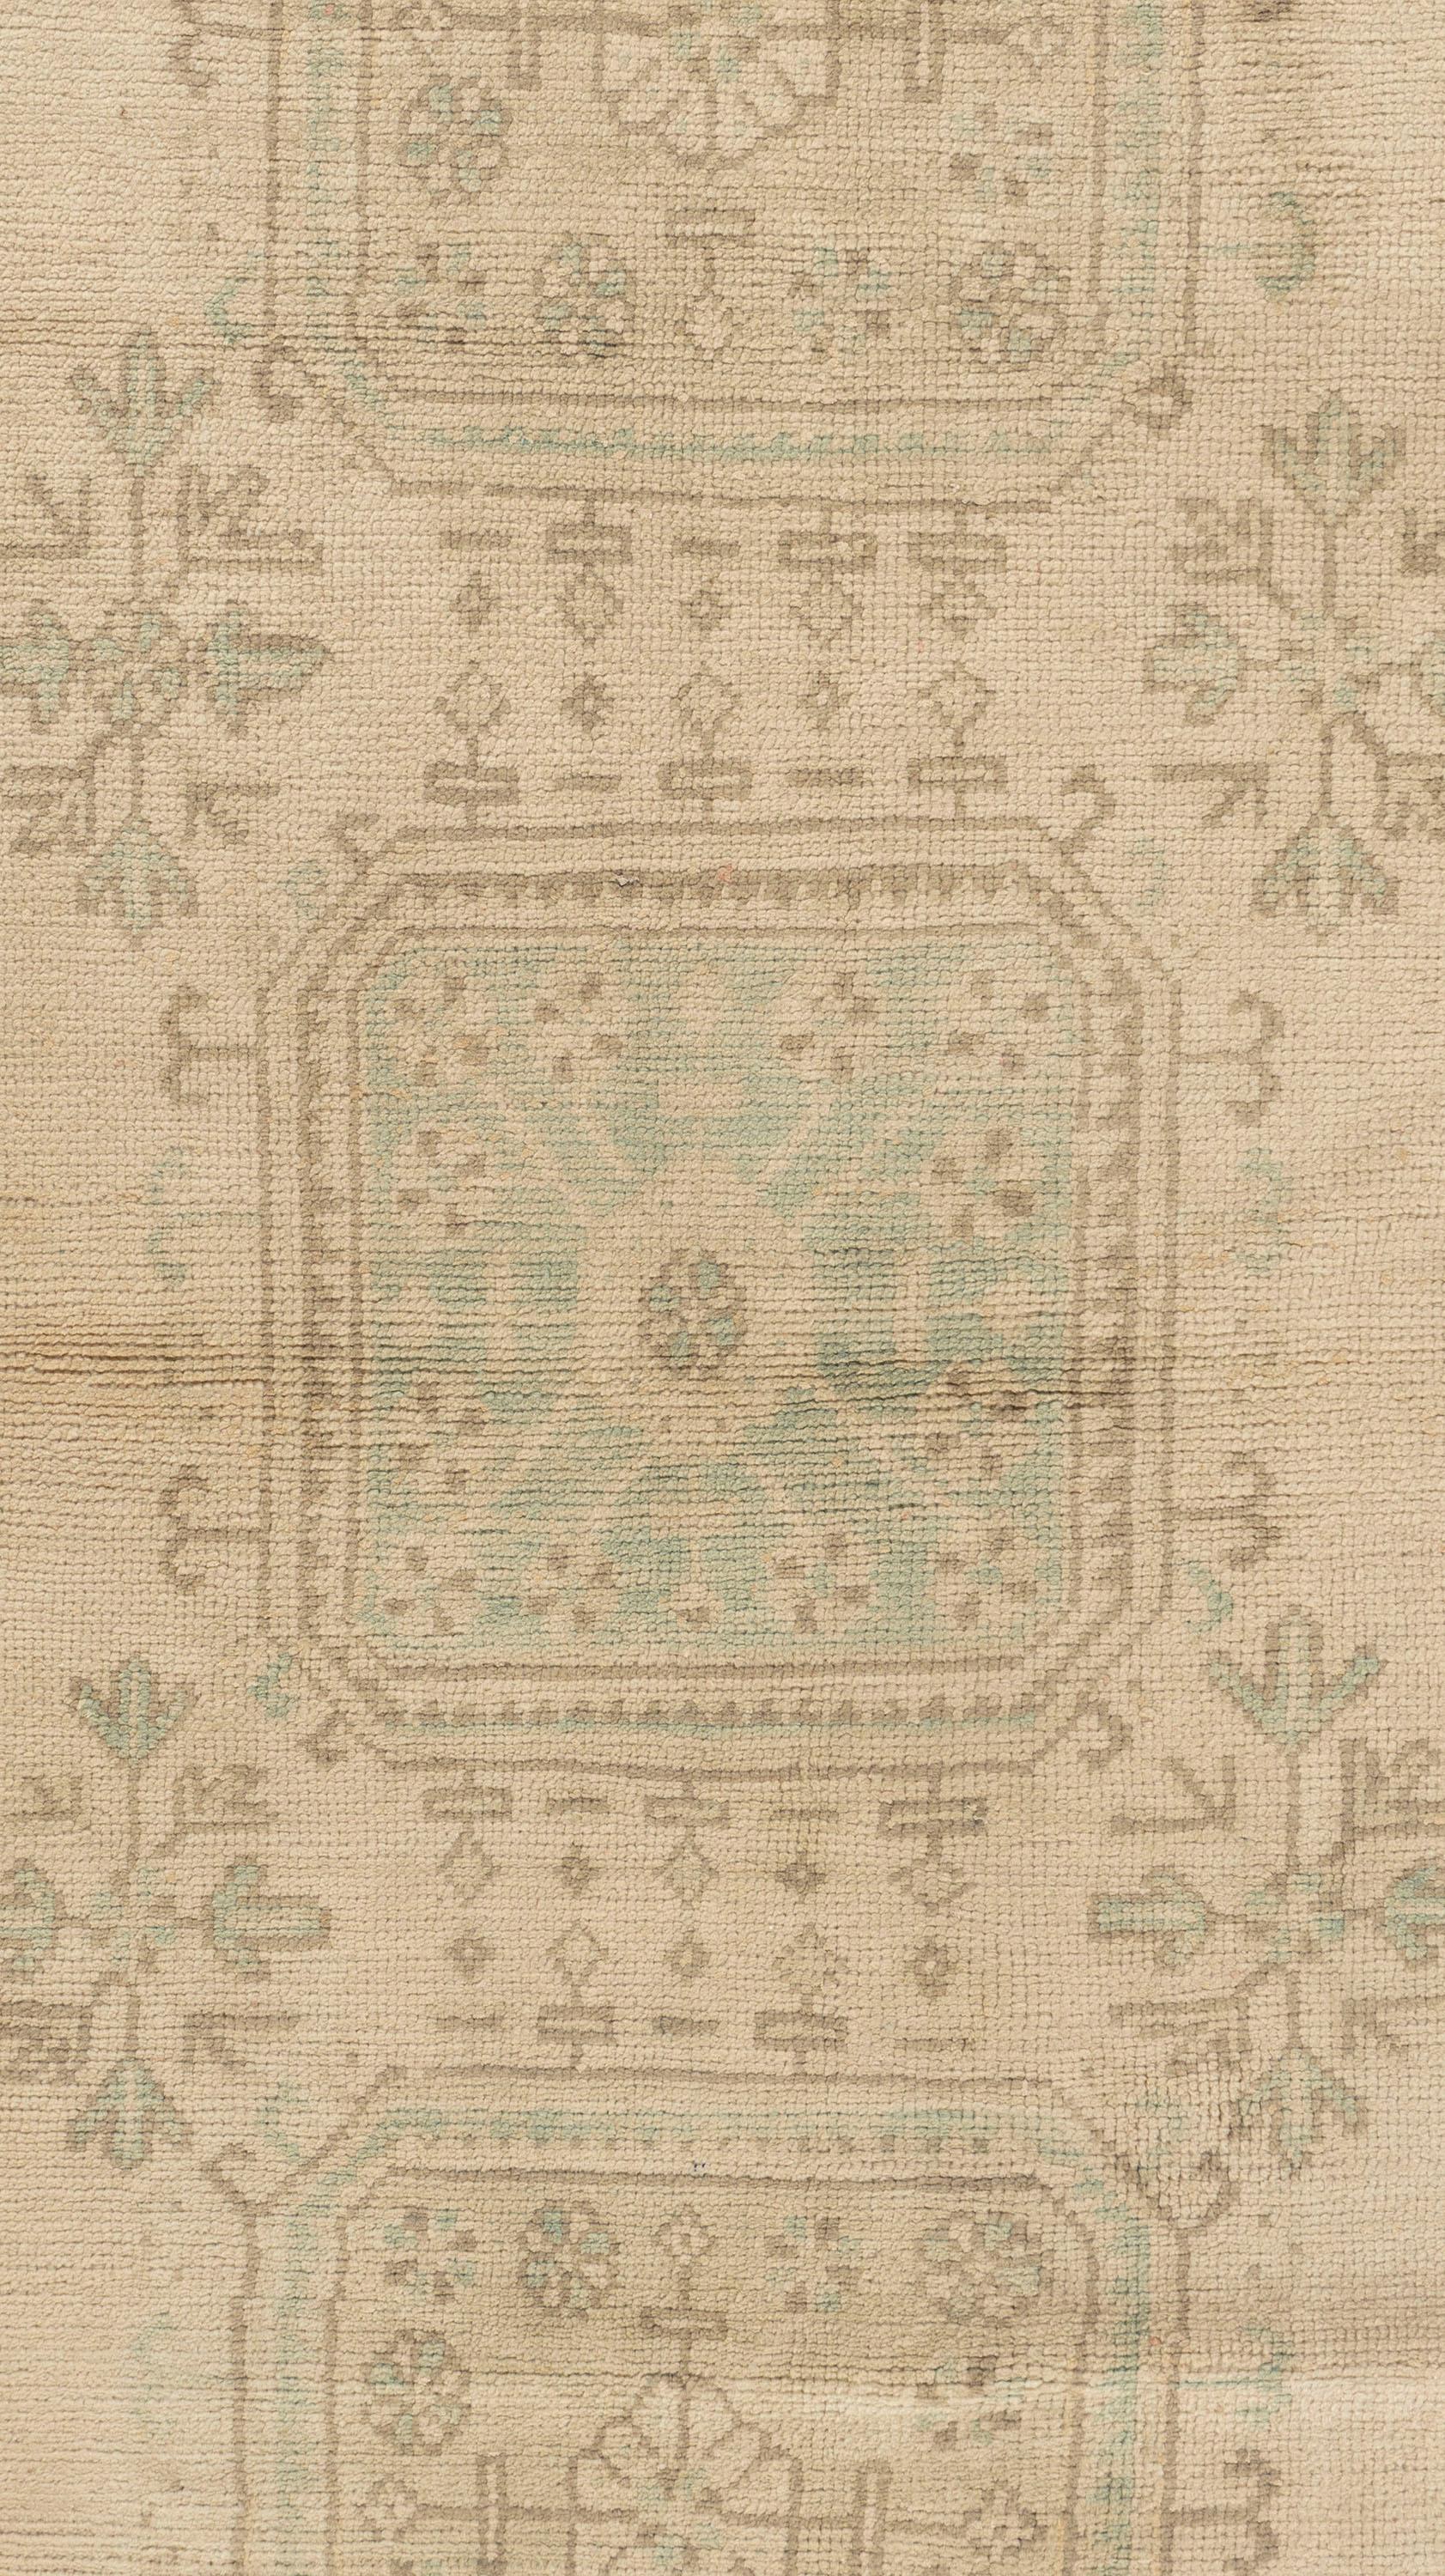 Vintage Turkish Oushak Runne 3'3 X 11'4. These attractive rugs are suitable for a wide variety of places, but the significant effect of Oushaks is that they bring space together, making it cozy and warm. The artistic technique of weaving Oushak's